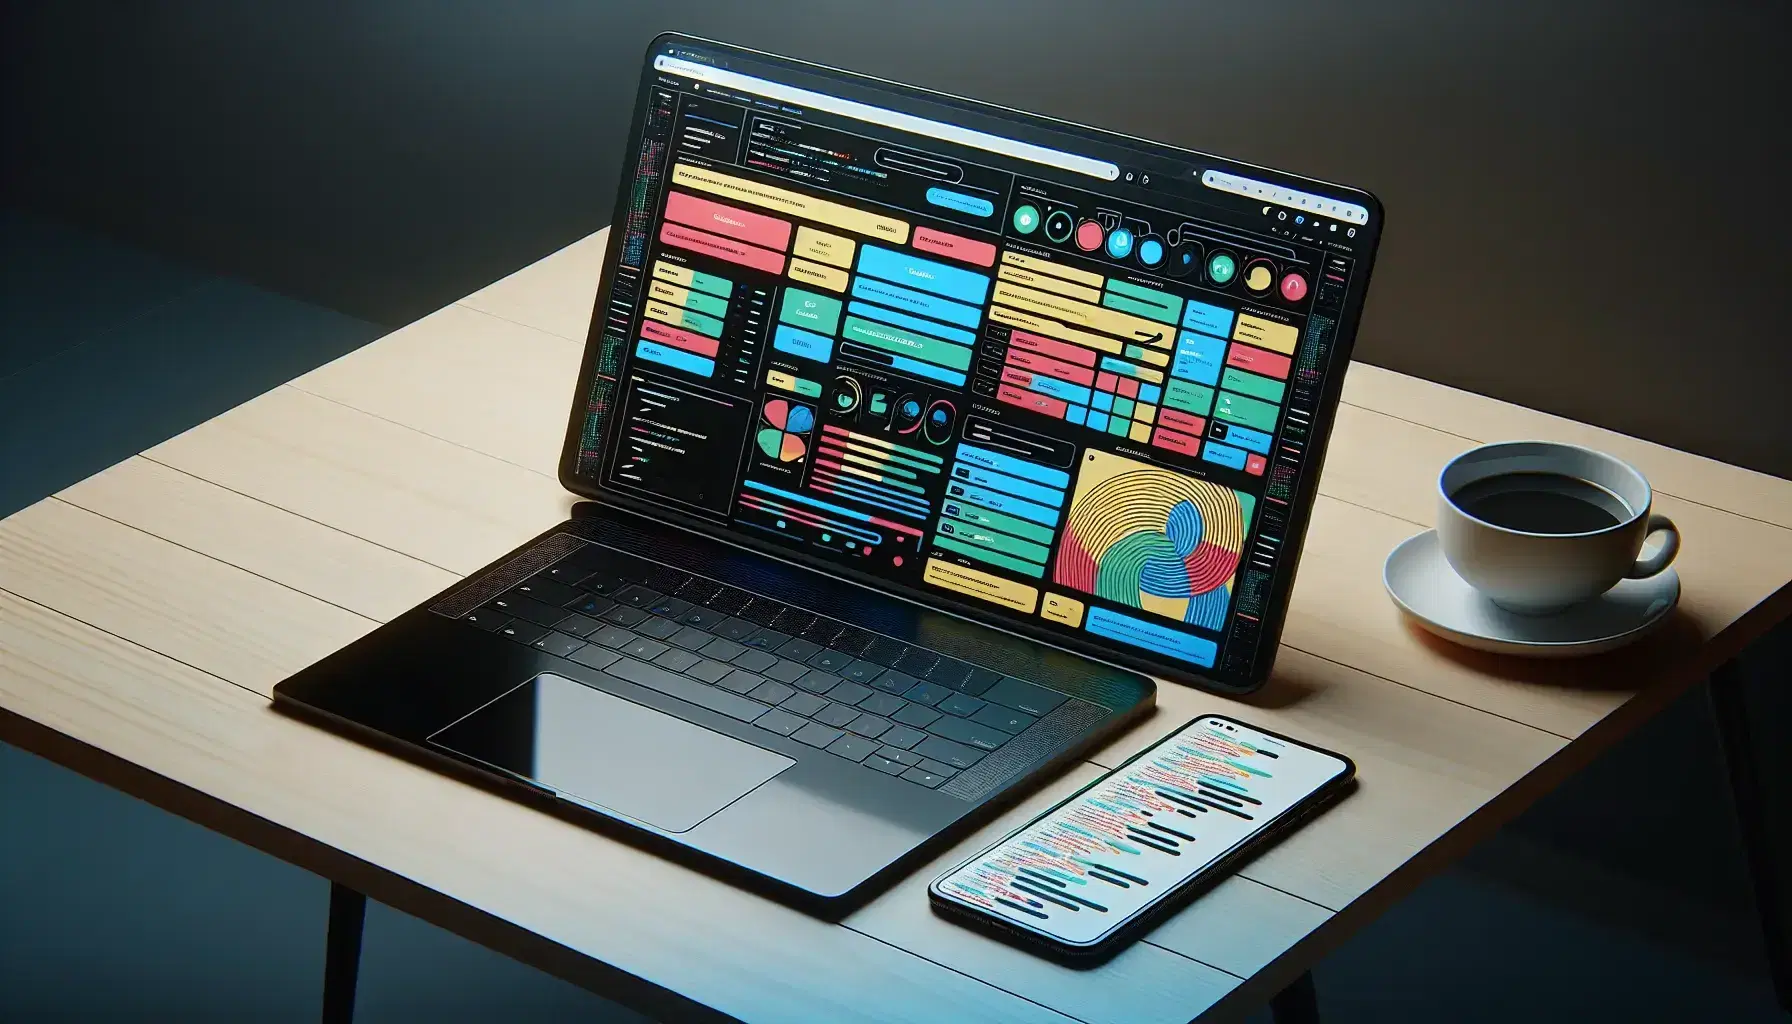 Modern laptop on light wooden desk with split screen between colorful web page layout and abstract shapes, next to smartphone and cup of coffee.